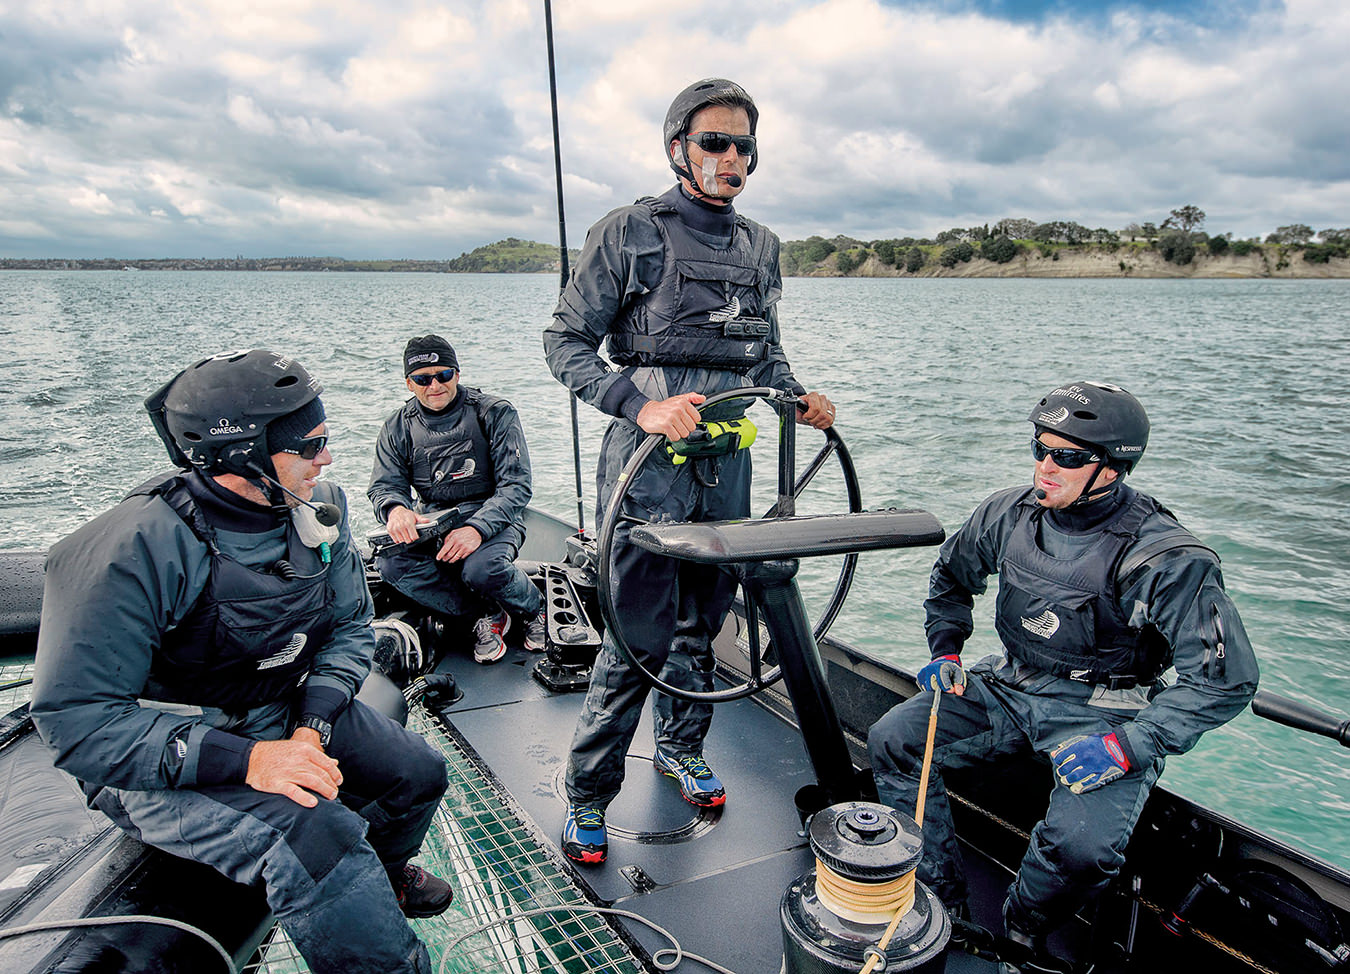 NUVO Magazine: America's Cup